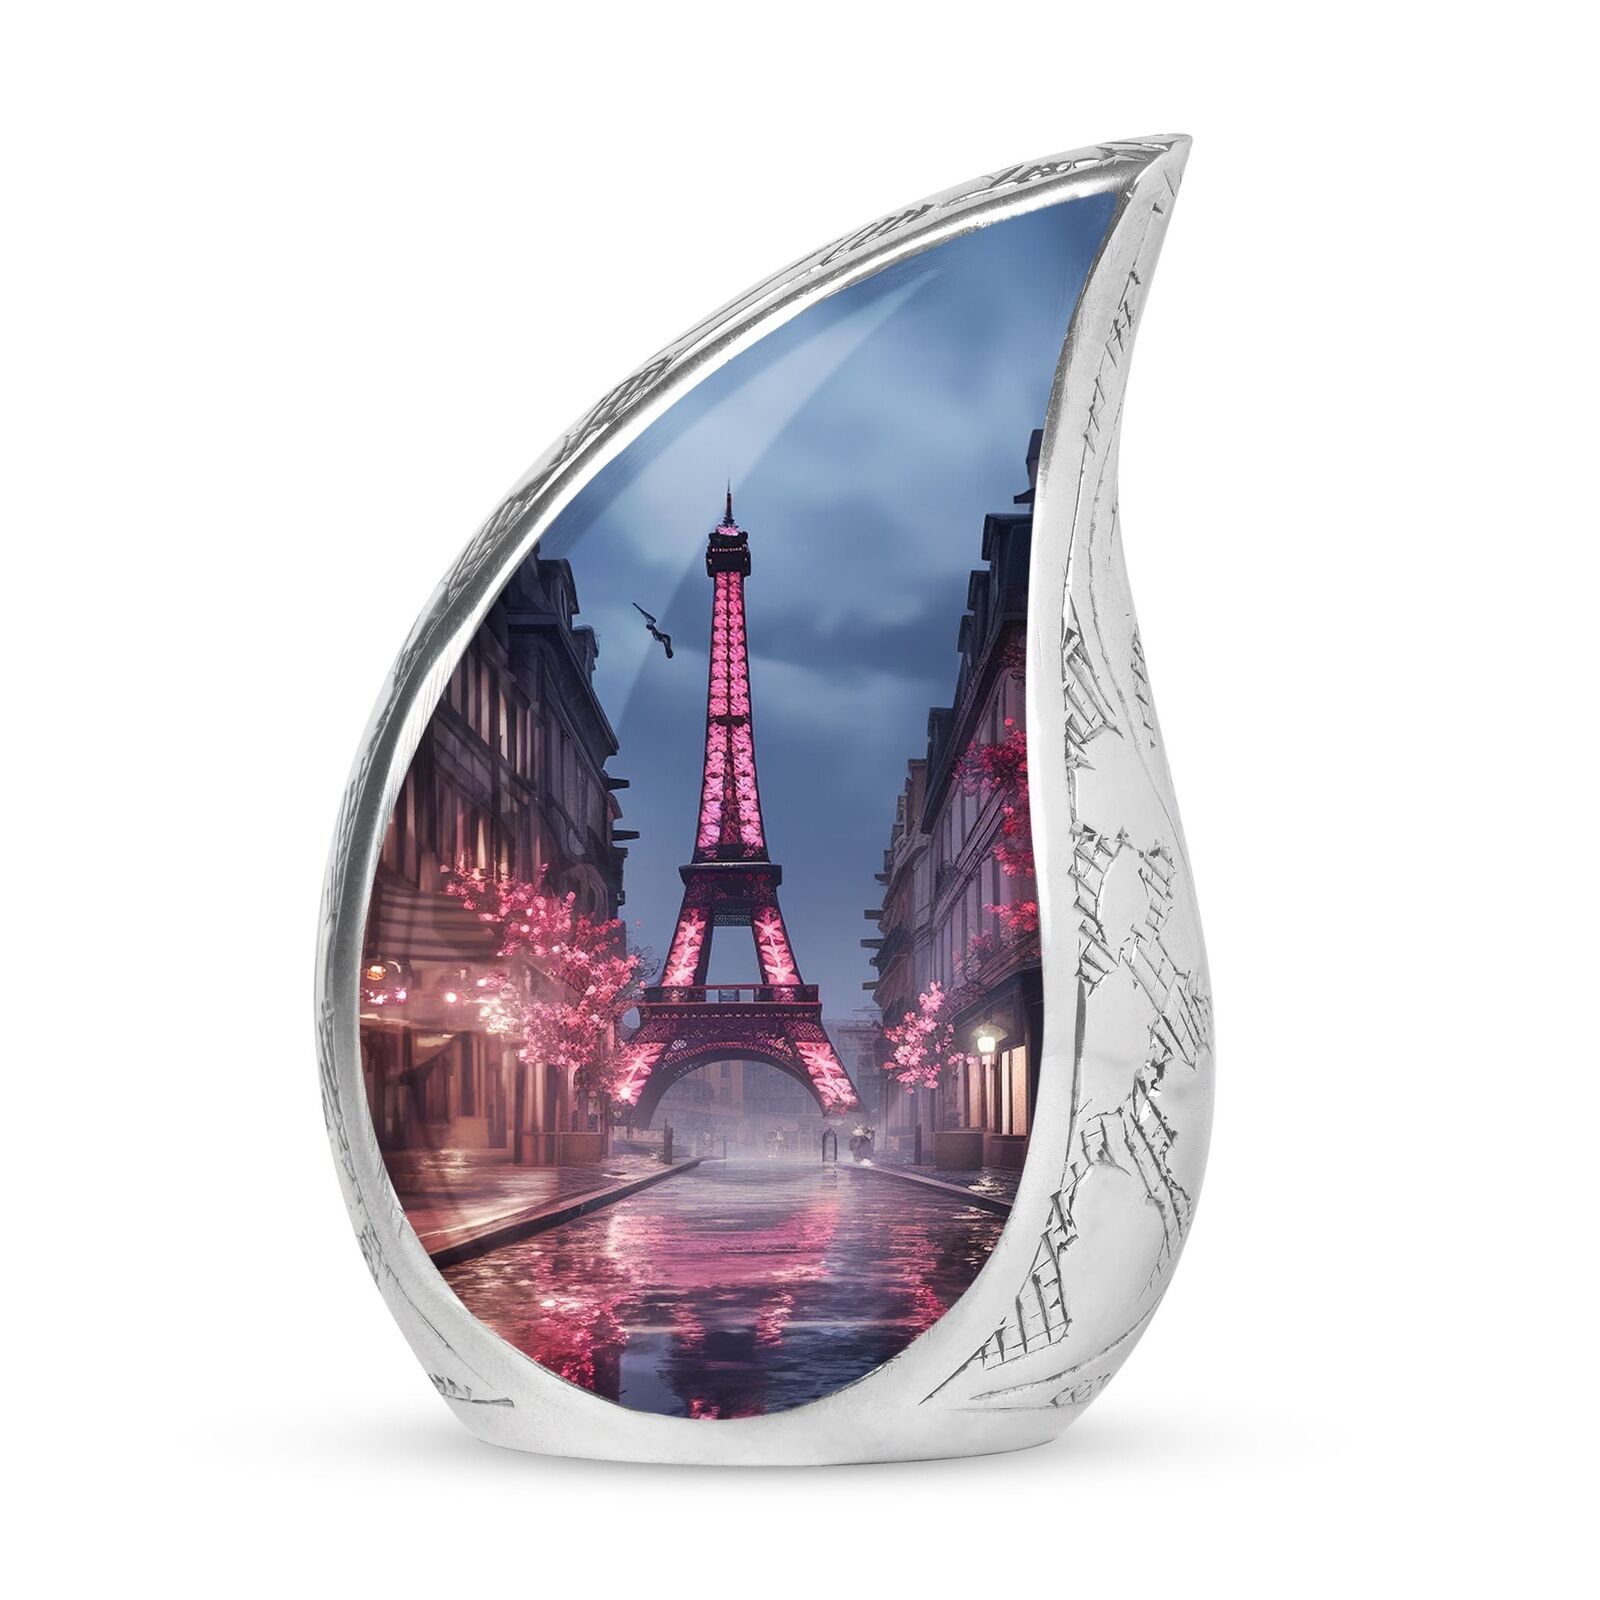 Eiffel Tower City Night View with Aesthetic | Human Cremation Urns For Ashes